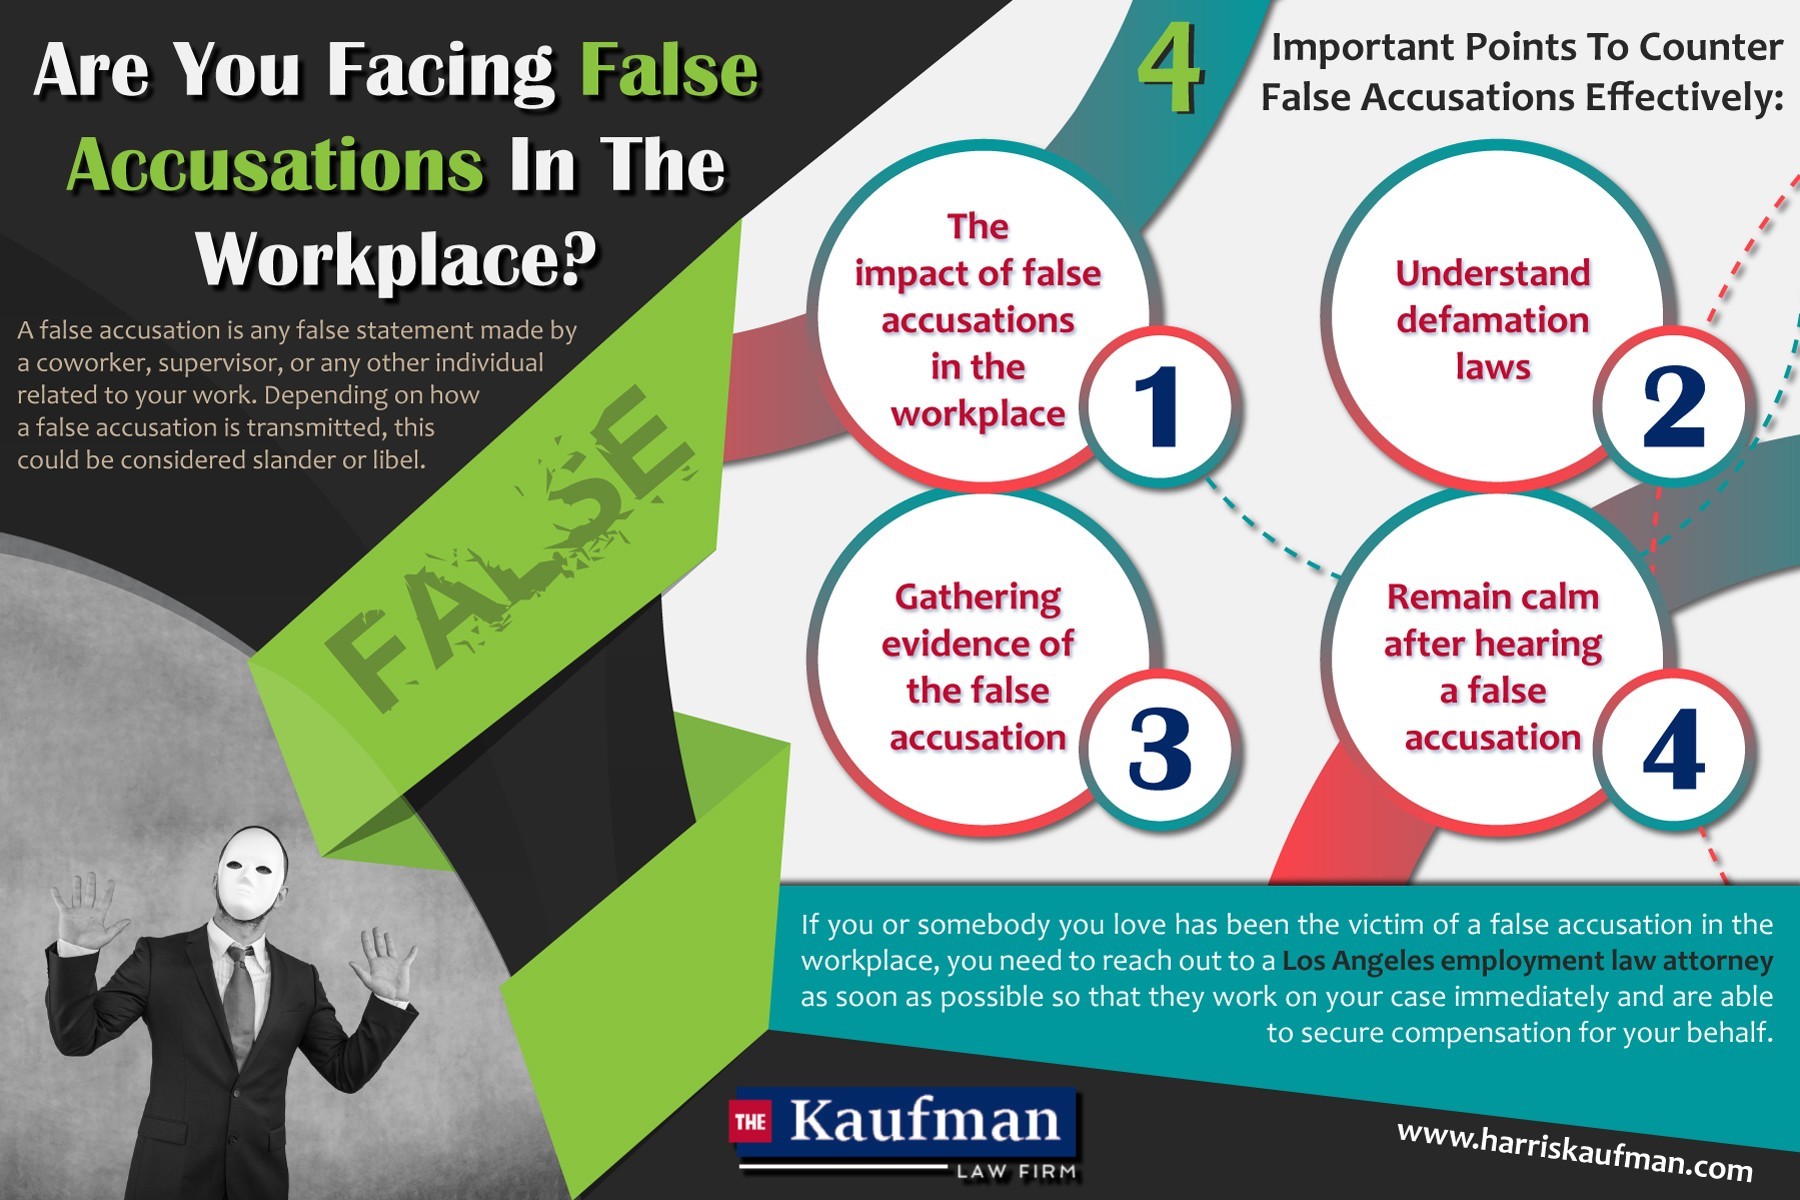 Are You Facing False Accusations In The Workplace?